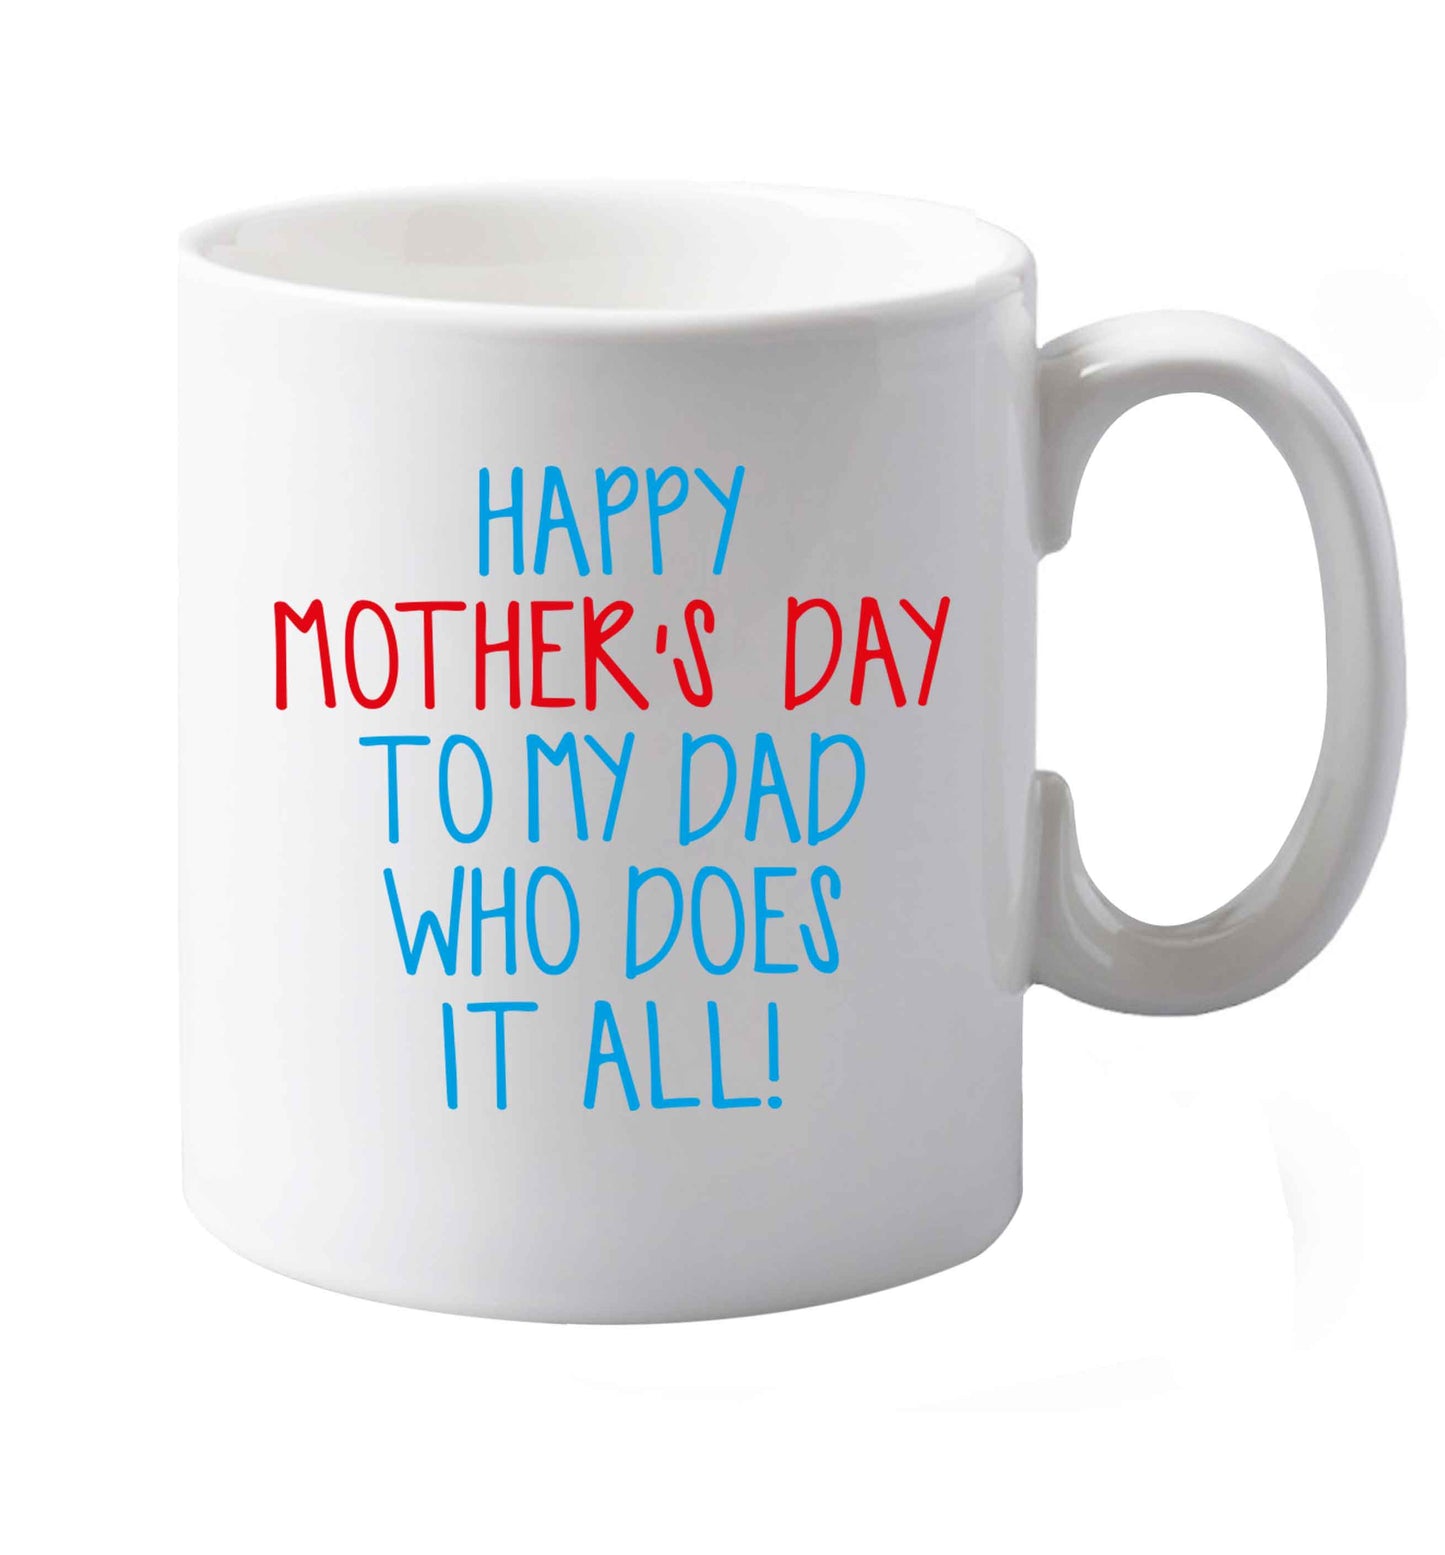 10 oz Happy mother's day to my dad who does it all! ceramic mug both sides